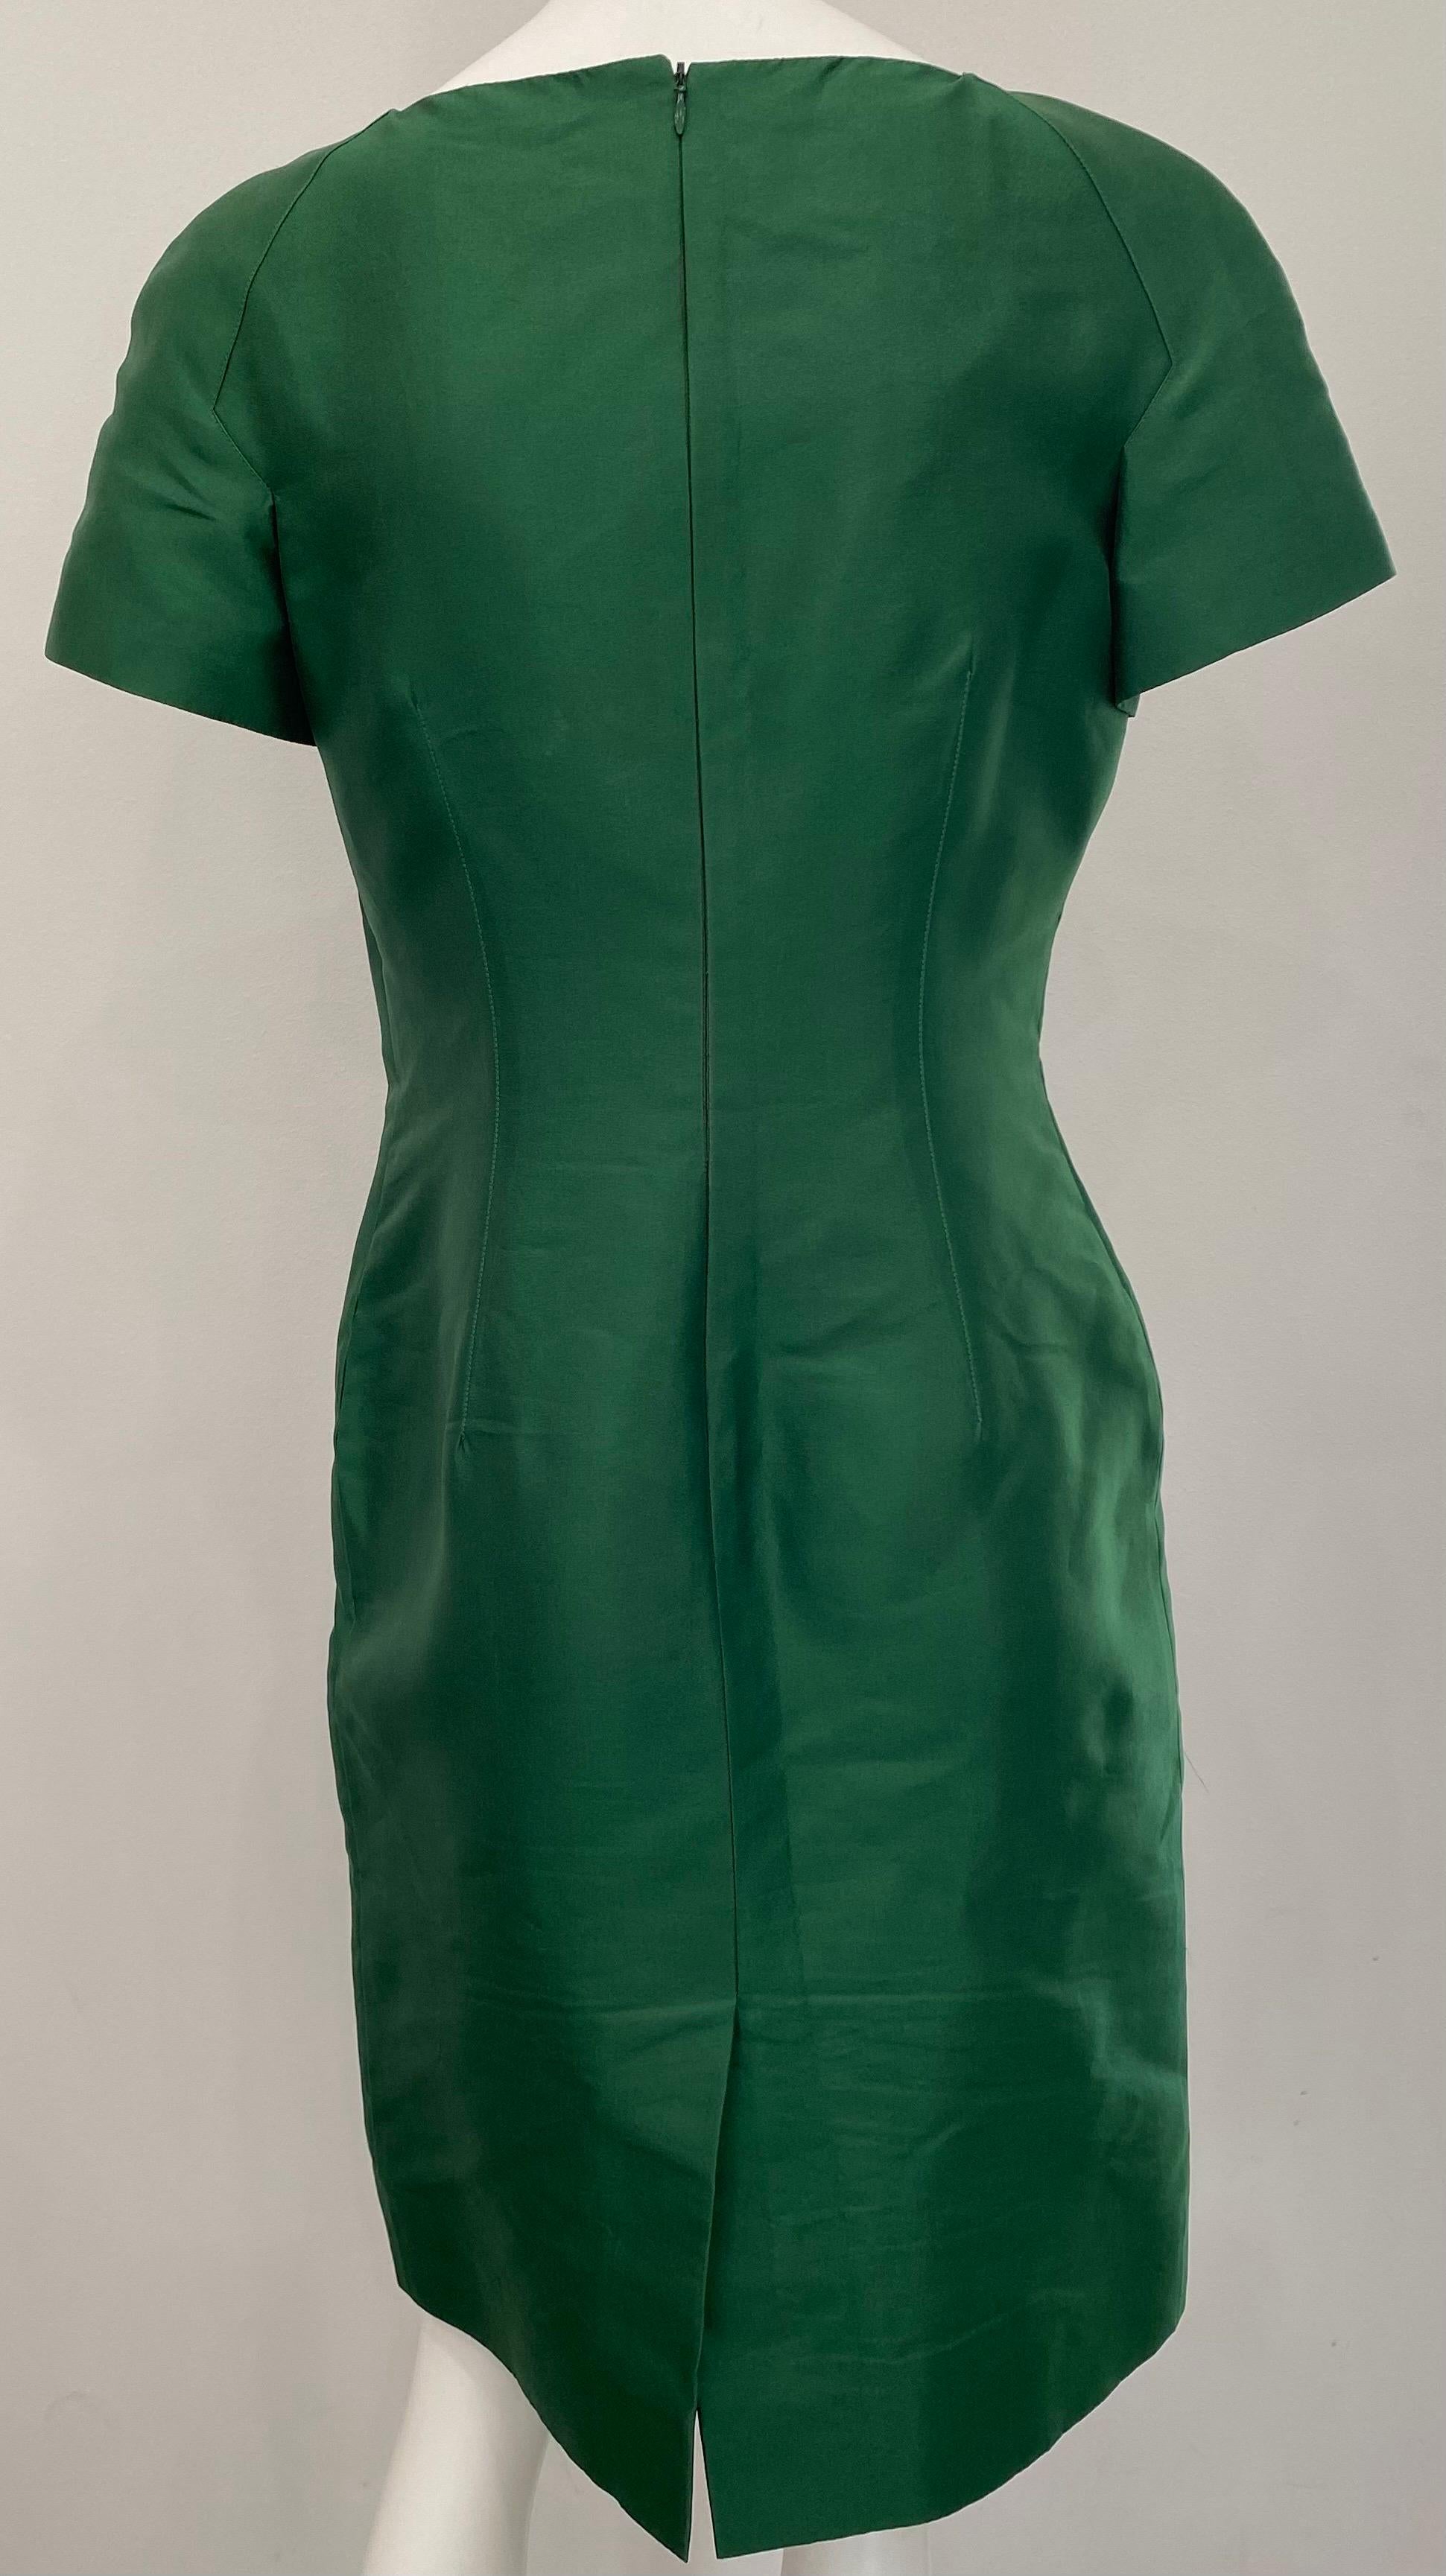 Women's or Men's Valentino Emerald Green Silk and Lace Cap Sleeve Sheath Dress - Sz 8 For Sale